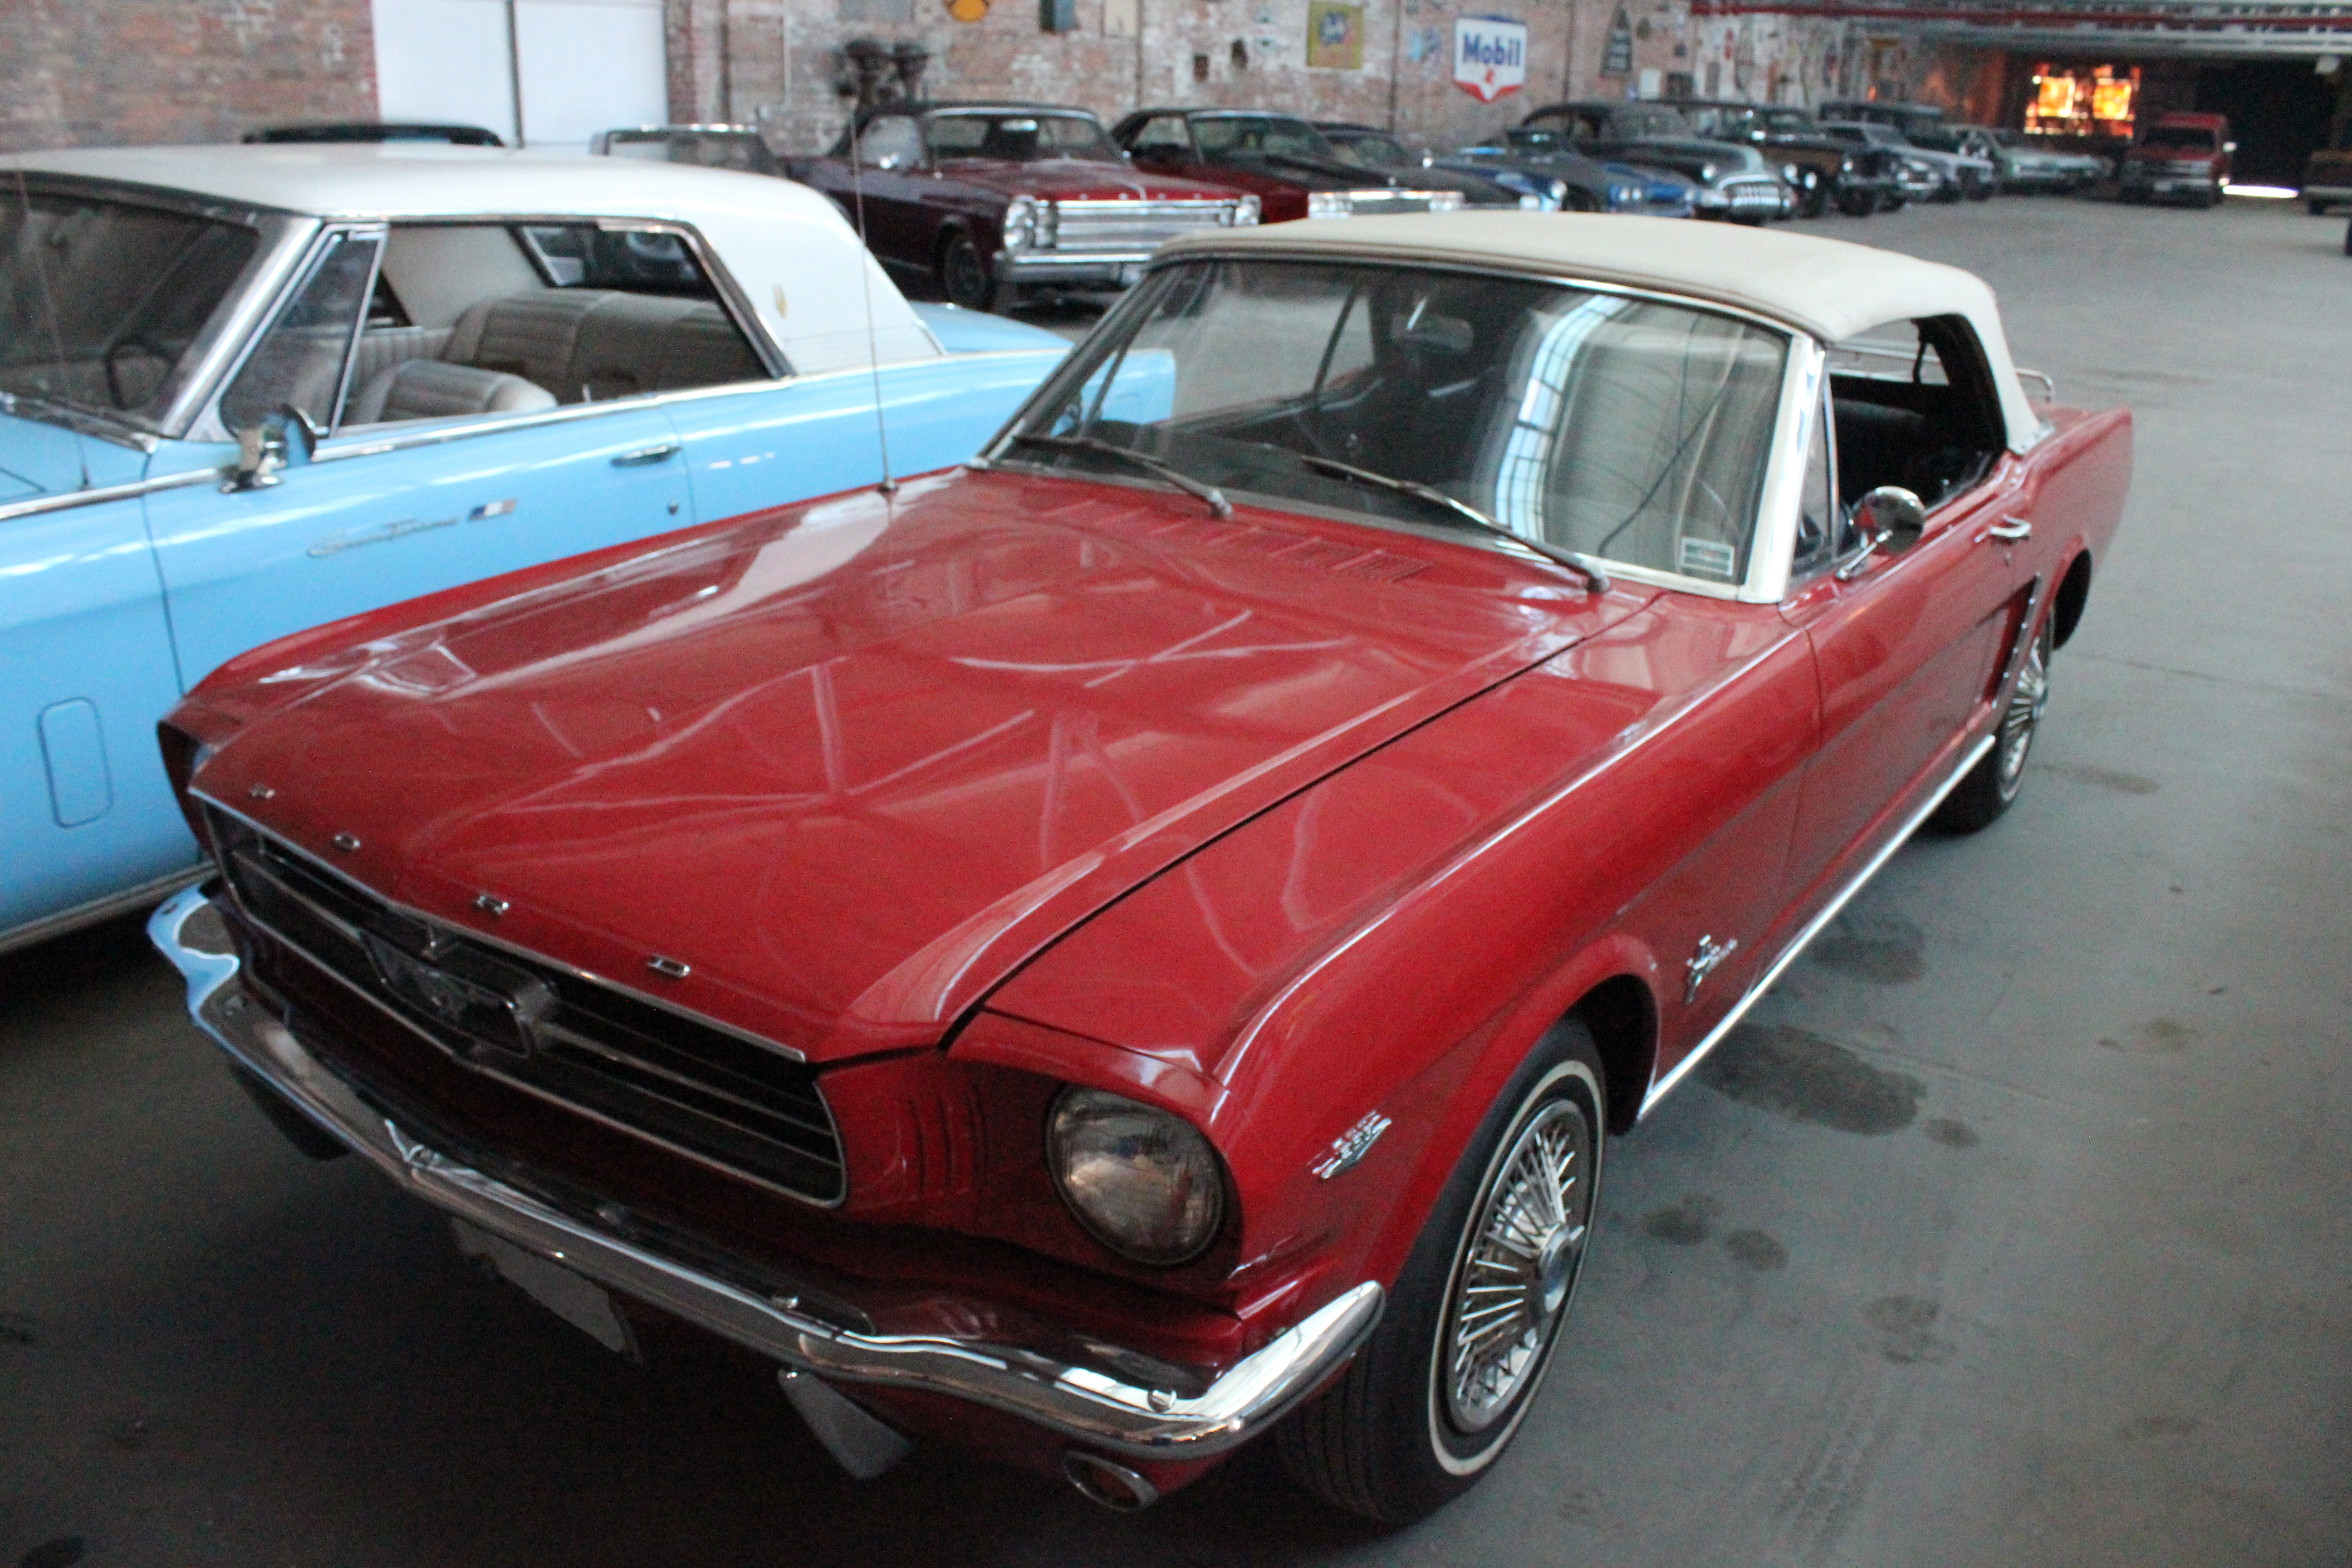 1965 Ford Mustang (Convertible)